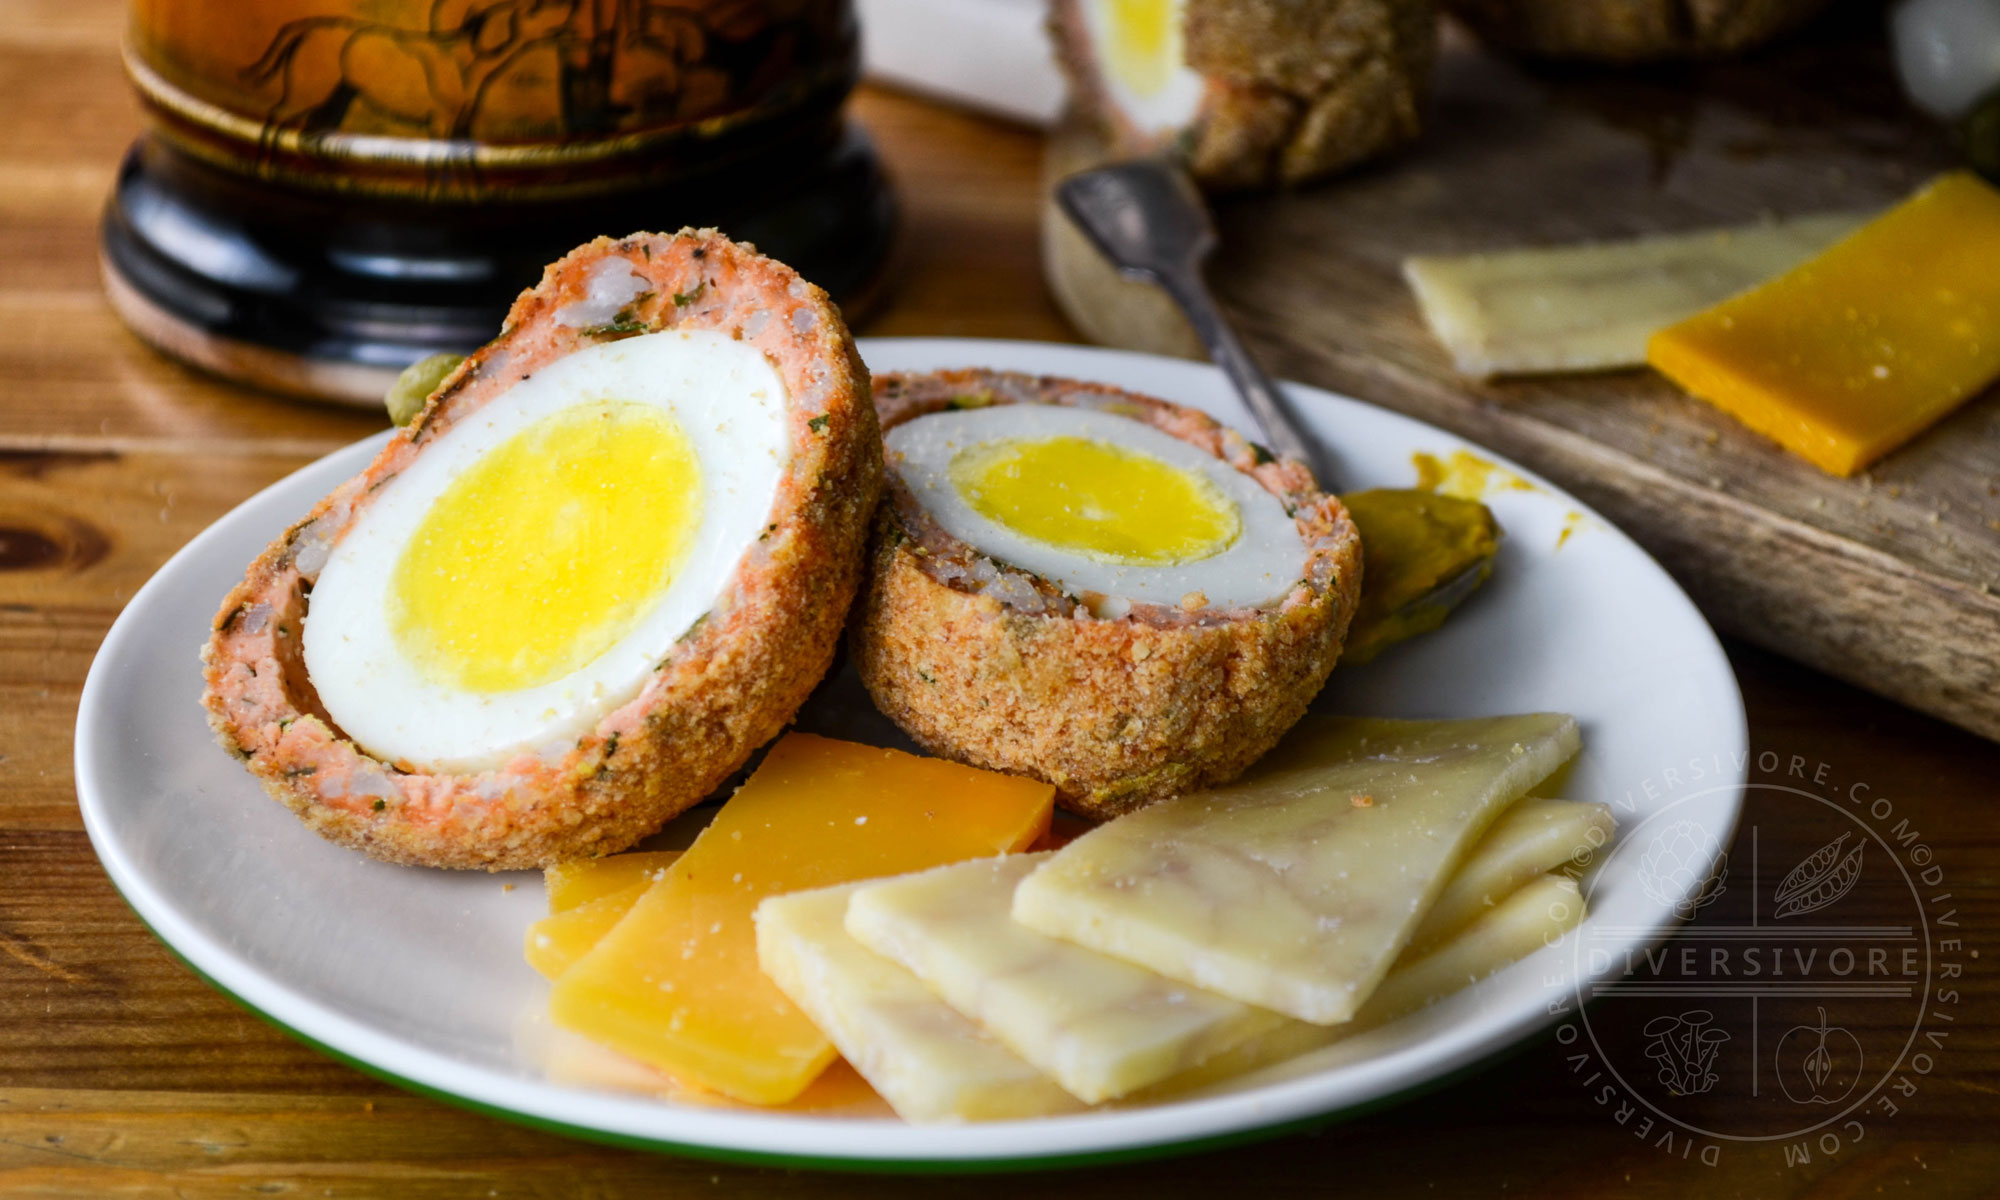 West Coast scotch eggs made with salmon sausage, served with cheese and mustard